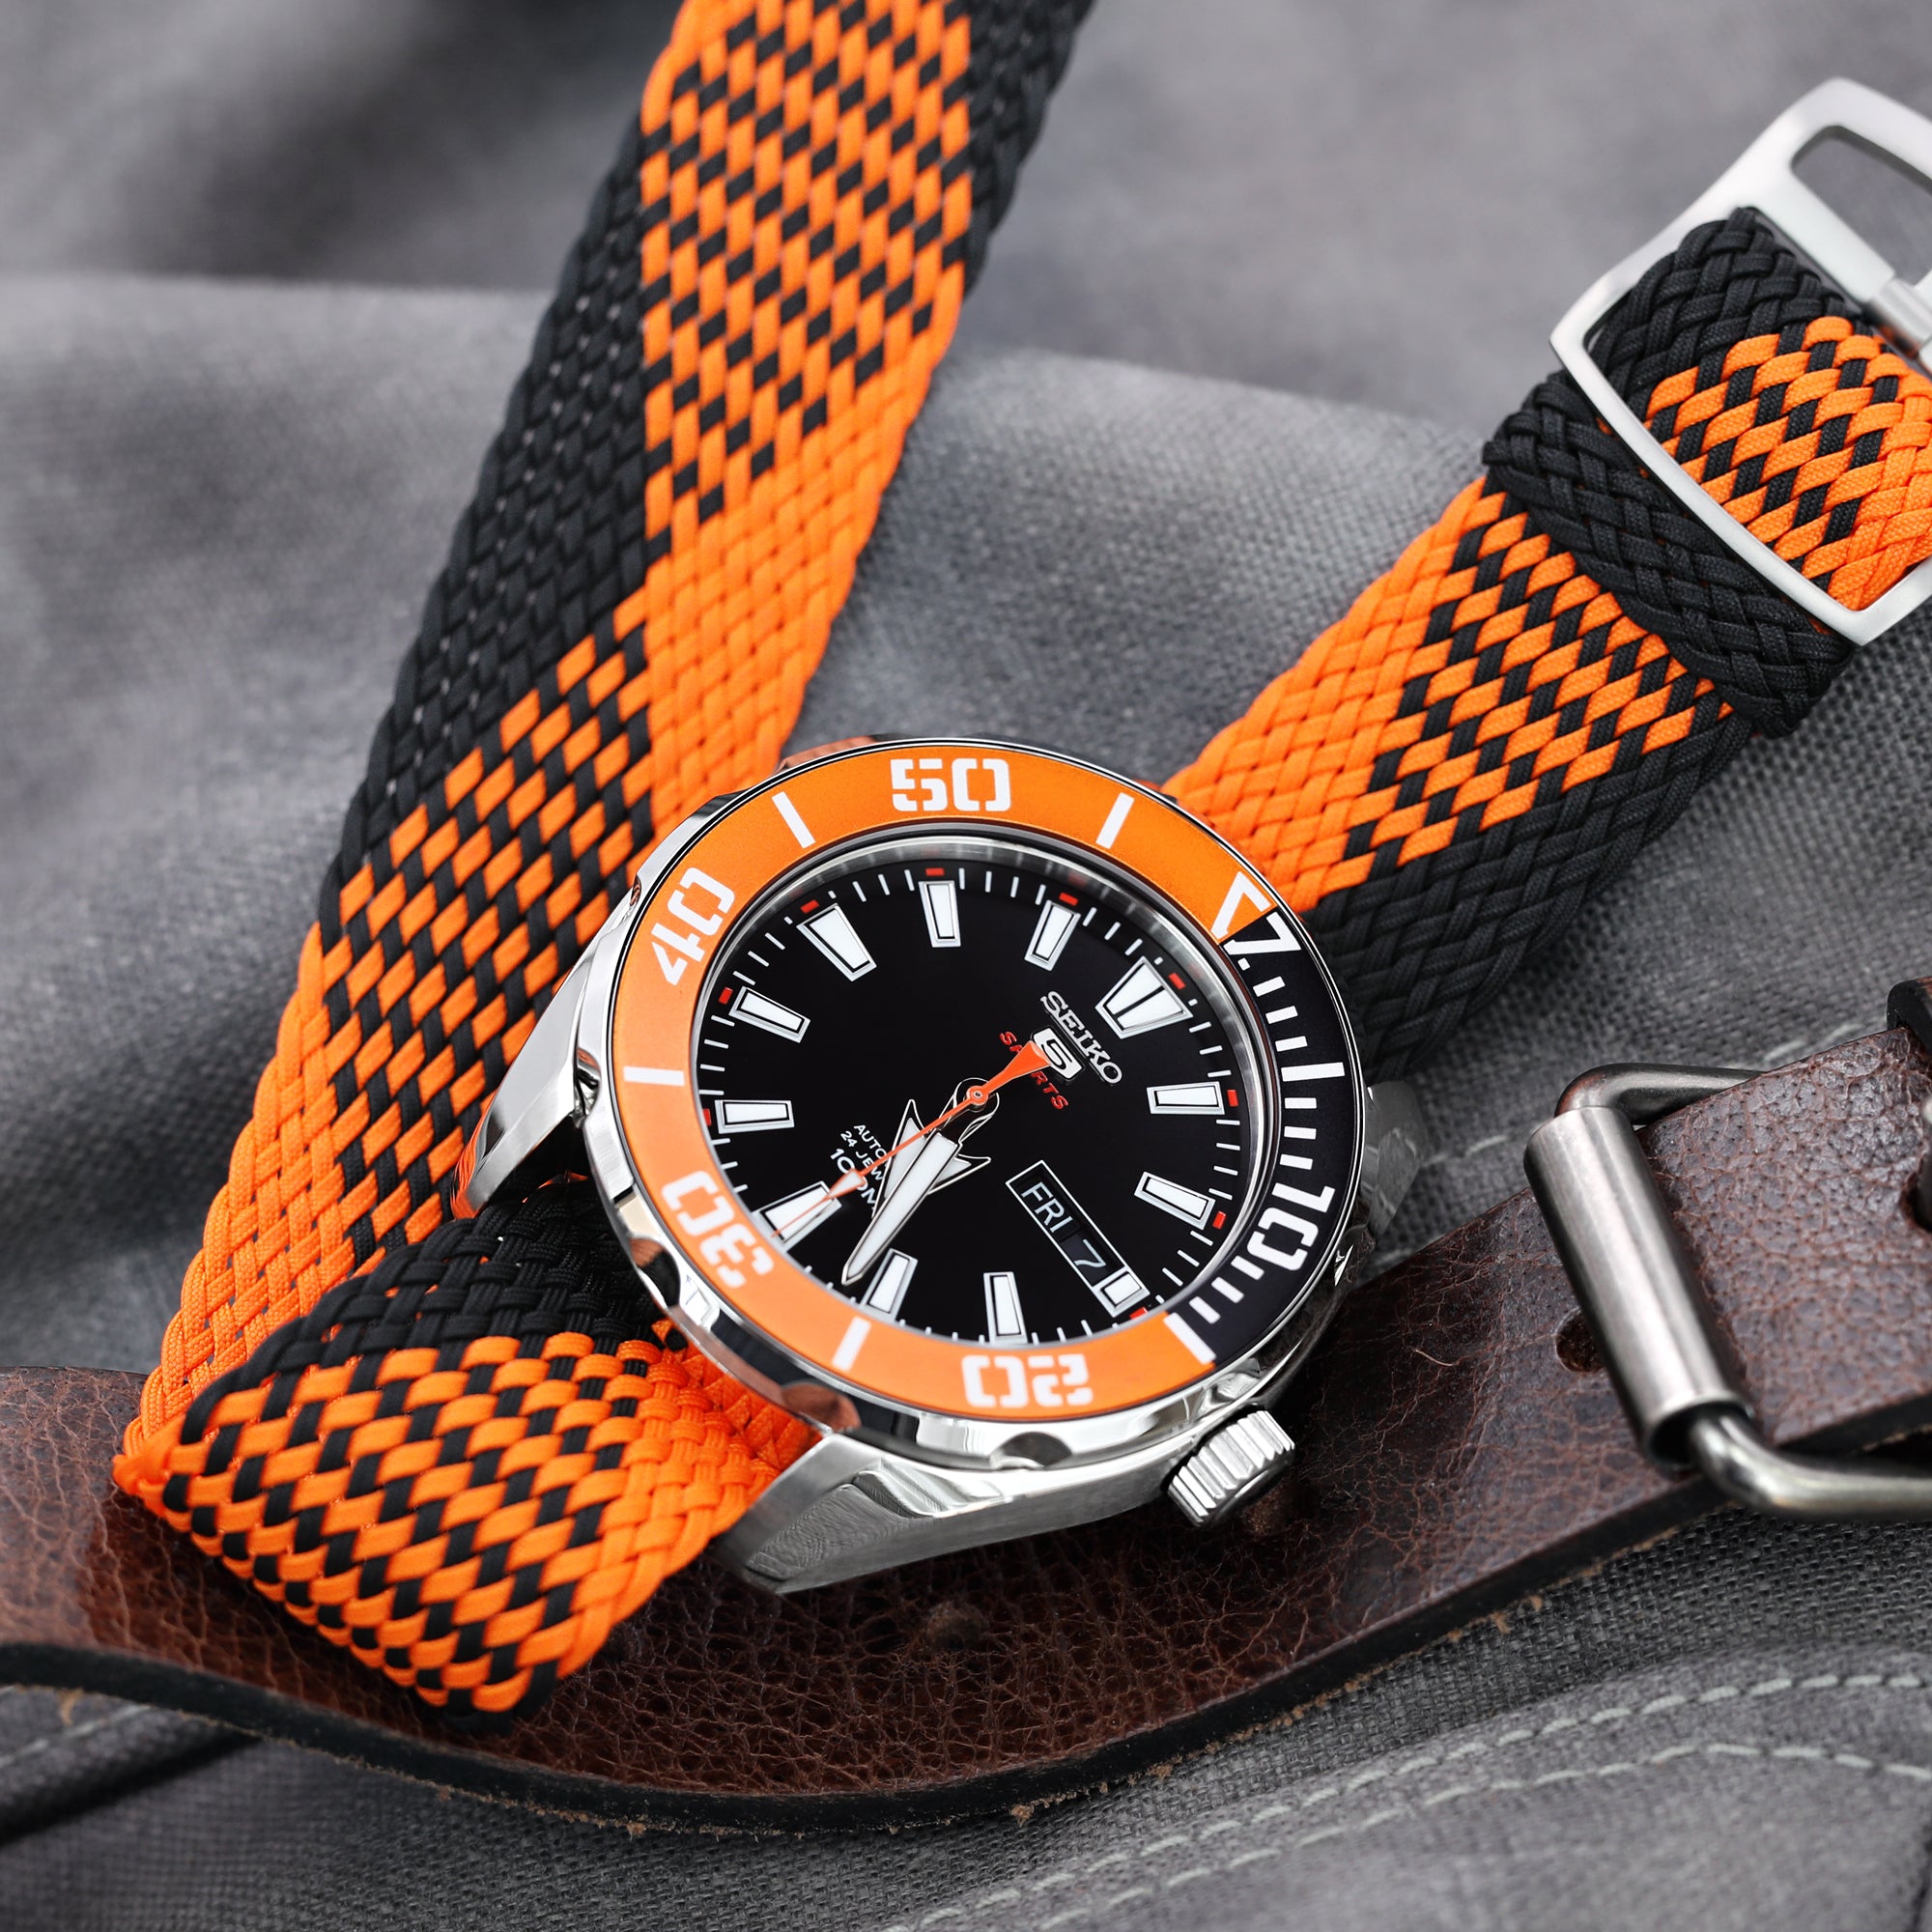 What Do You Look For In A Perlon Watch Strap?